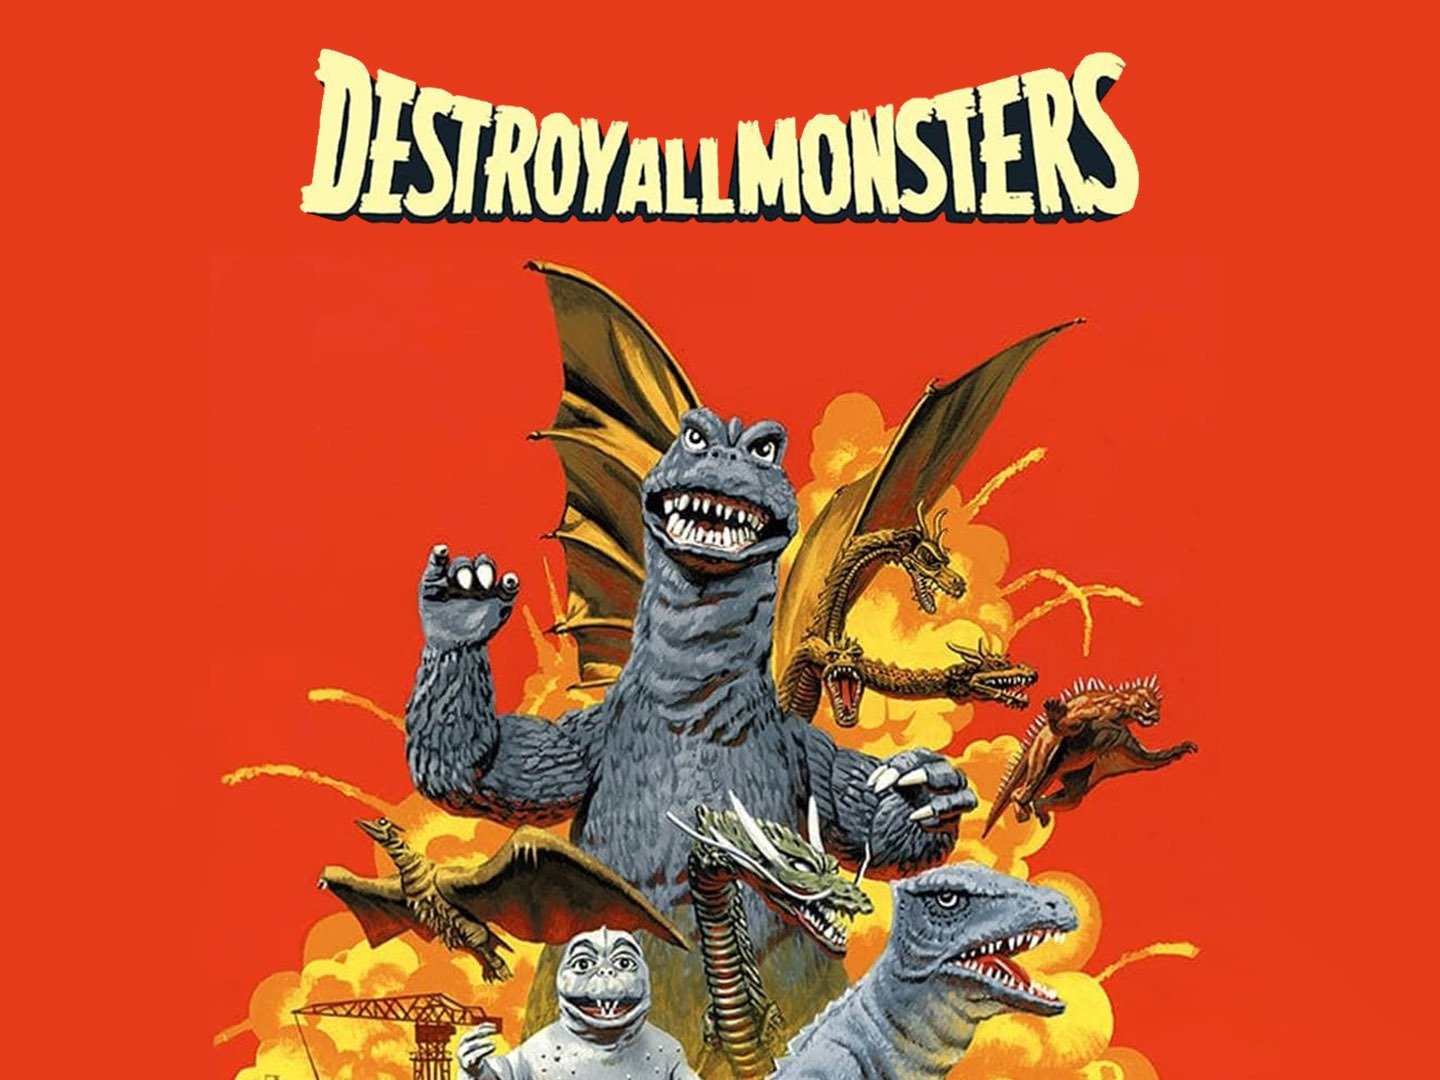 40-facts-about-the-movie-destroy-all-monsters